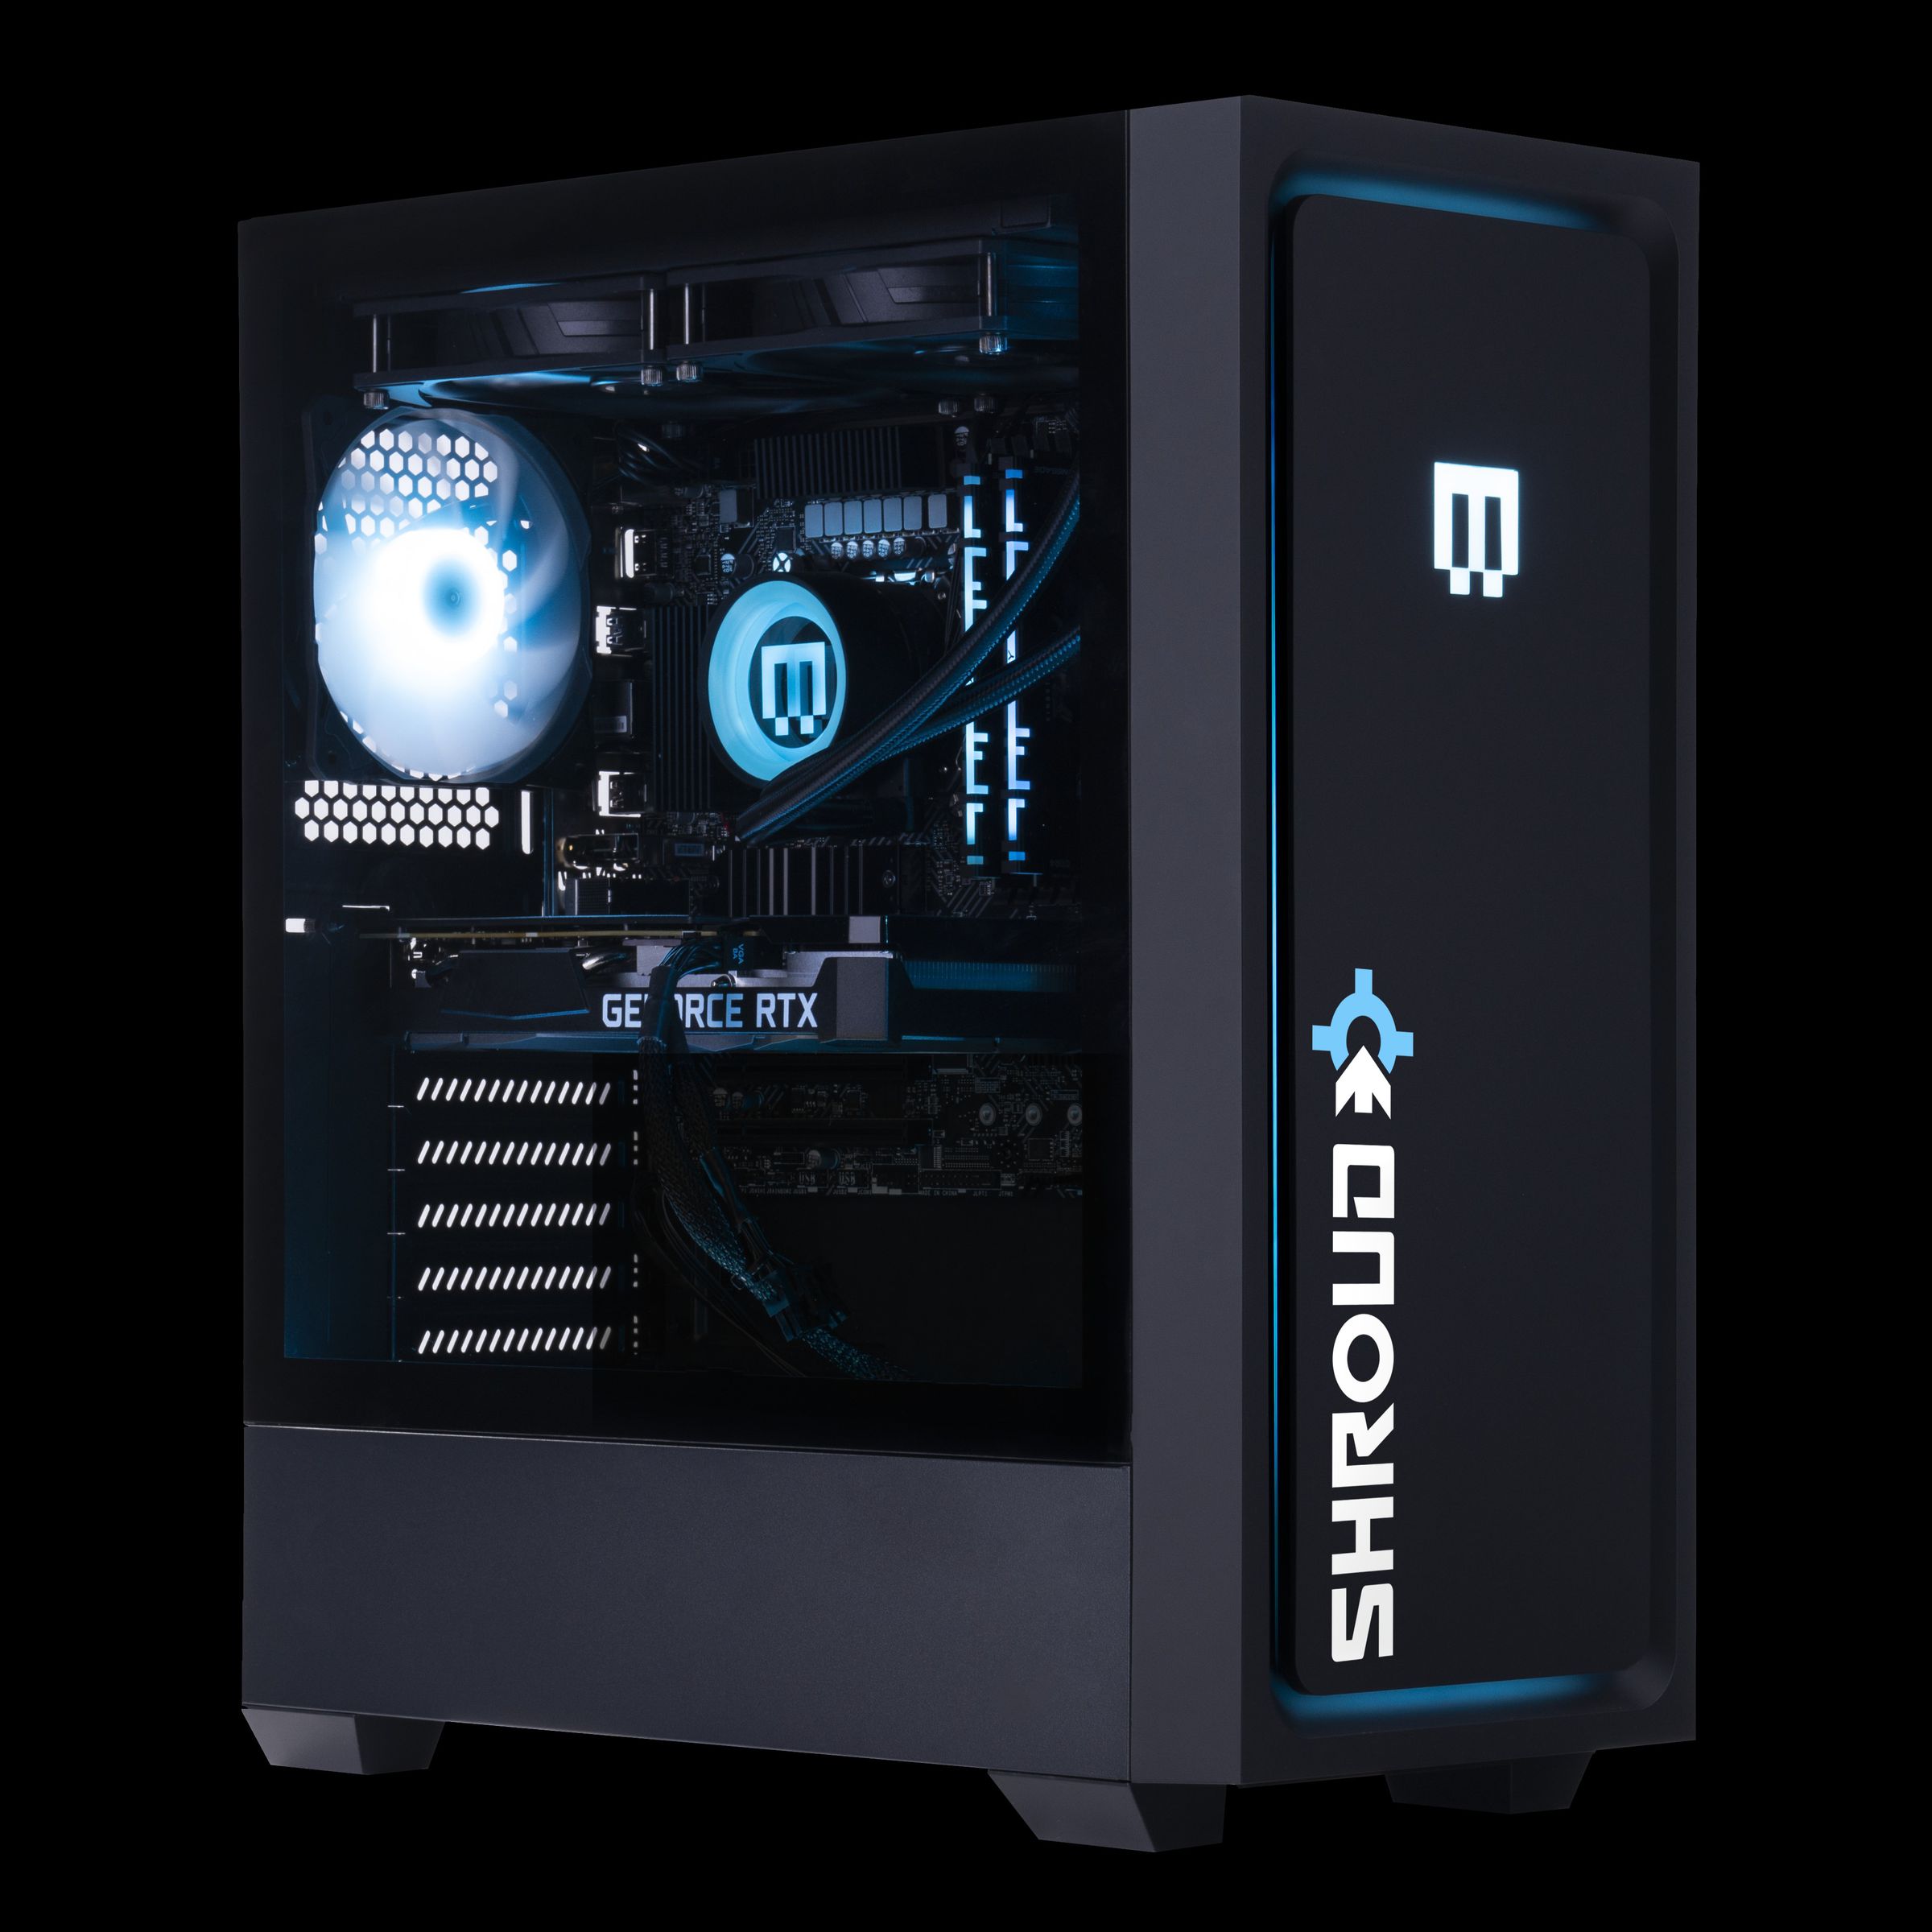 A blue-lit gaming PC with many fans on a black background with a big white Shroud logo on the front.